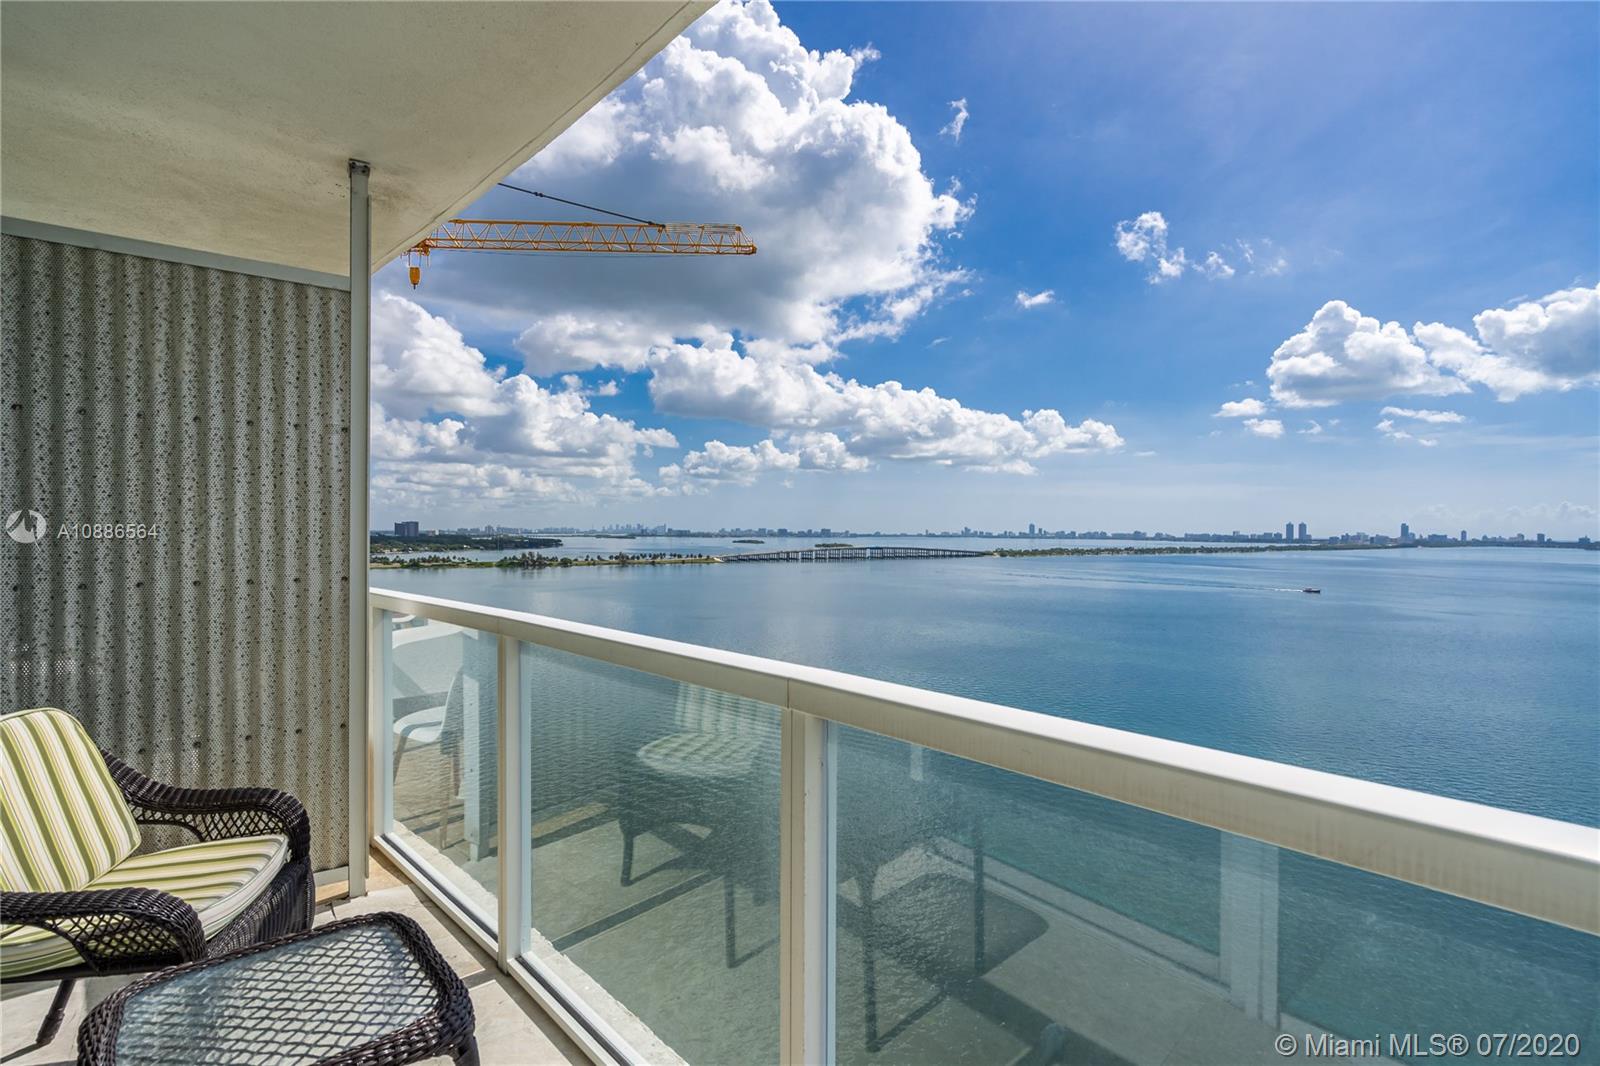 Photo 2 of Onyx on The Bay Apt 1503 in Miami - MLS A10886564